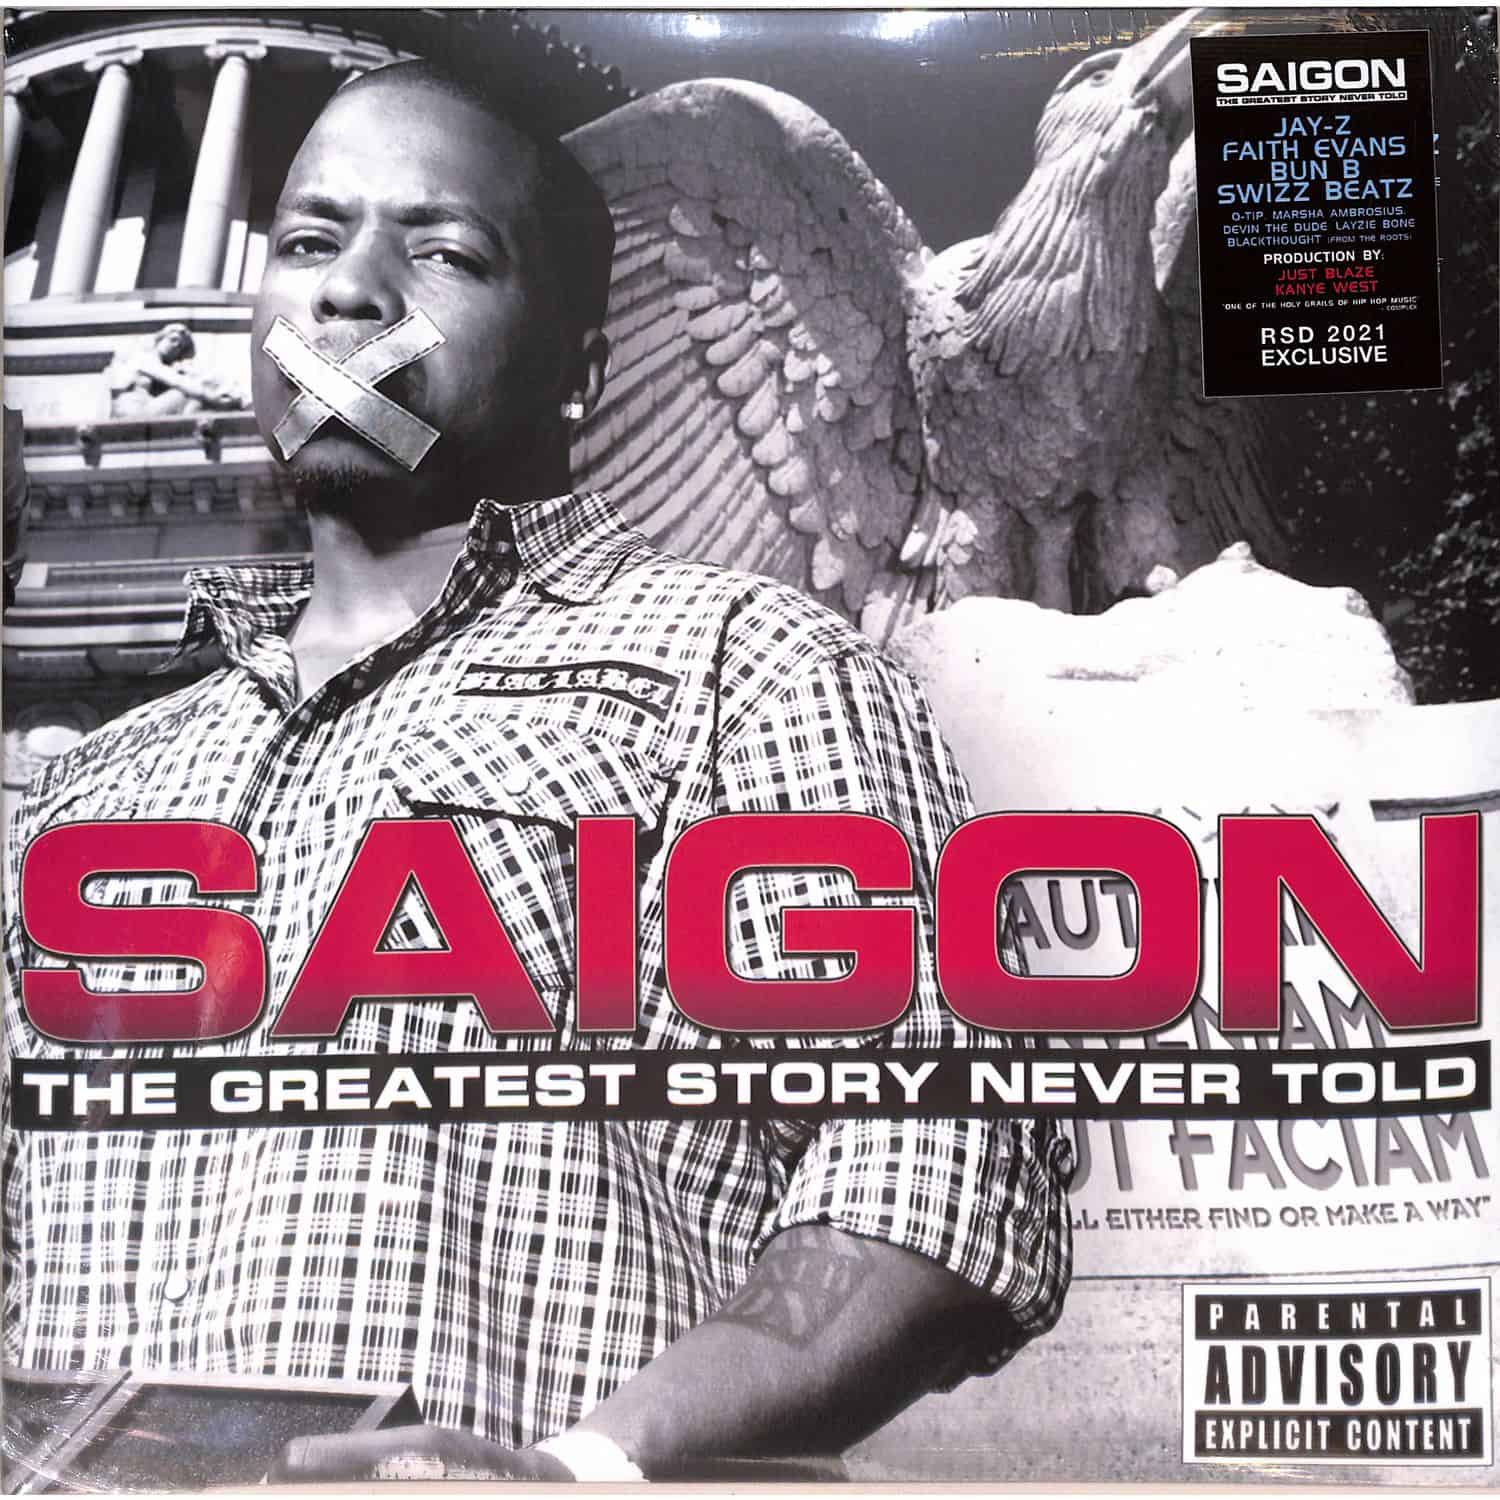 Saigon - THE GREATEST STORY NEVER TOLD 